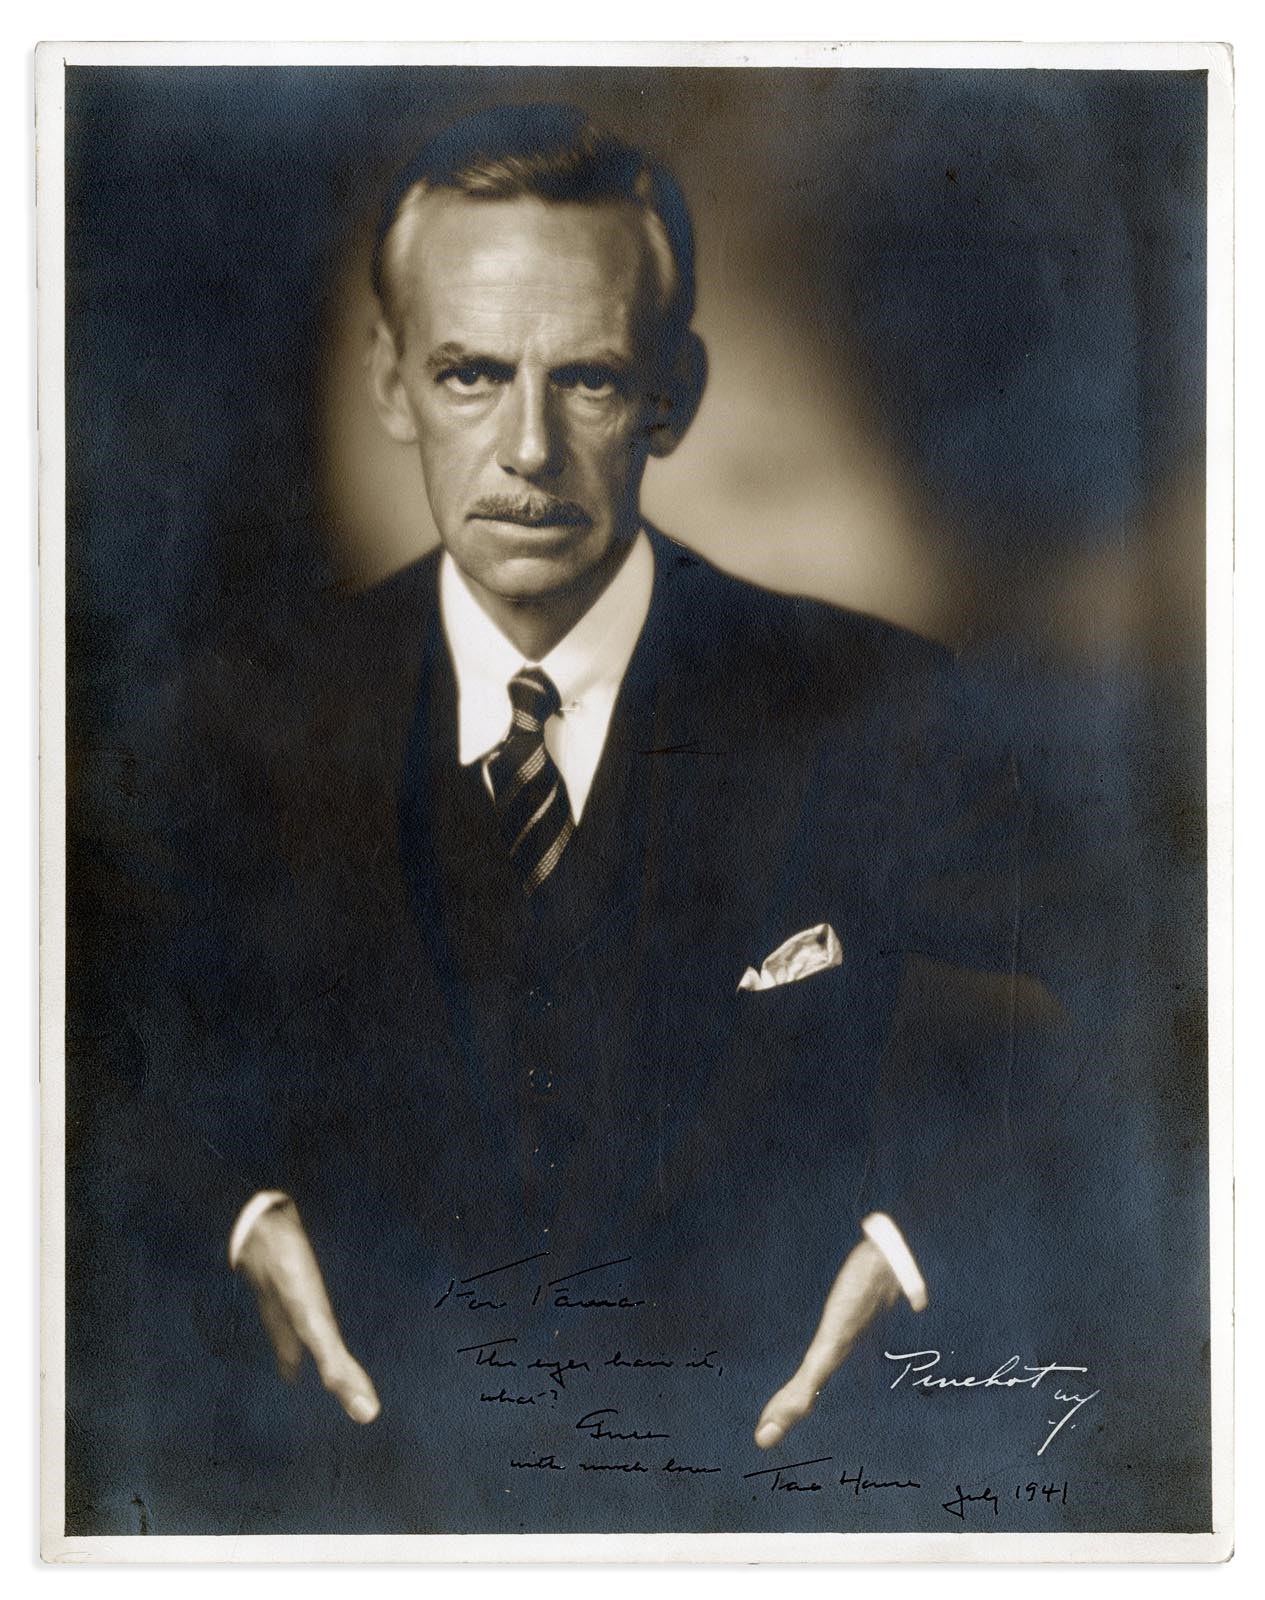 Rock And Pop Culture - 1941 Eugene O"Neill Signed Photo